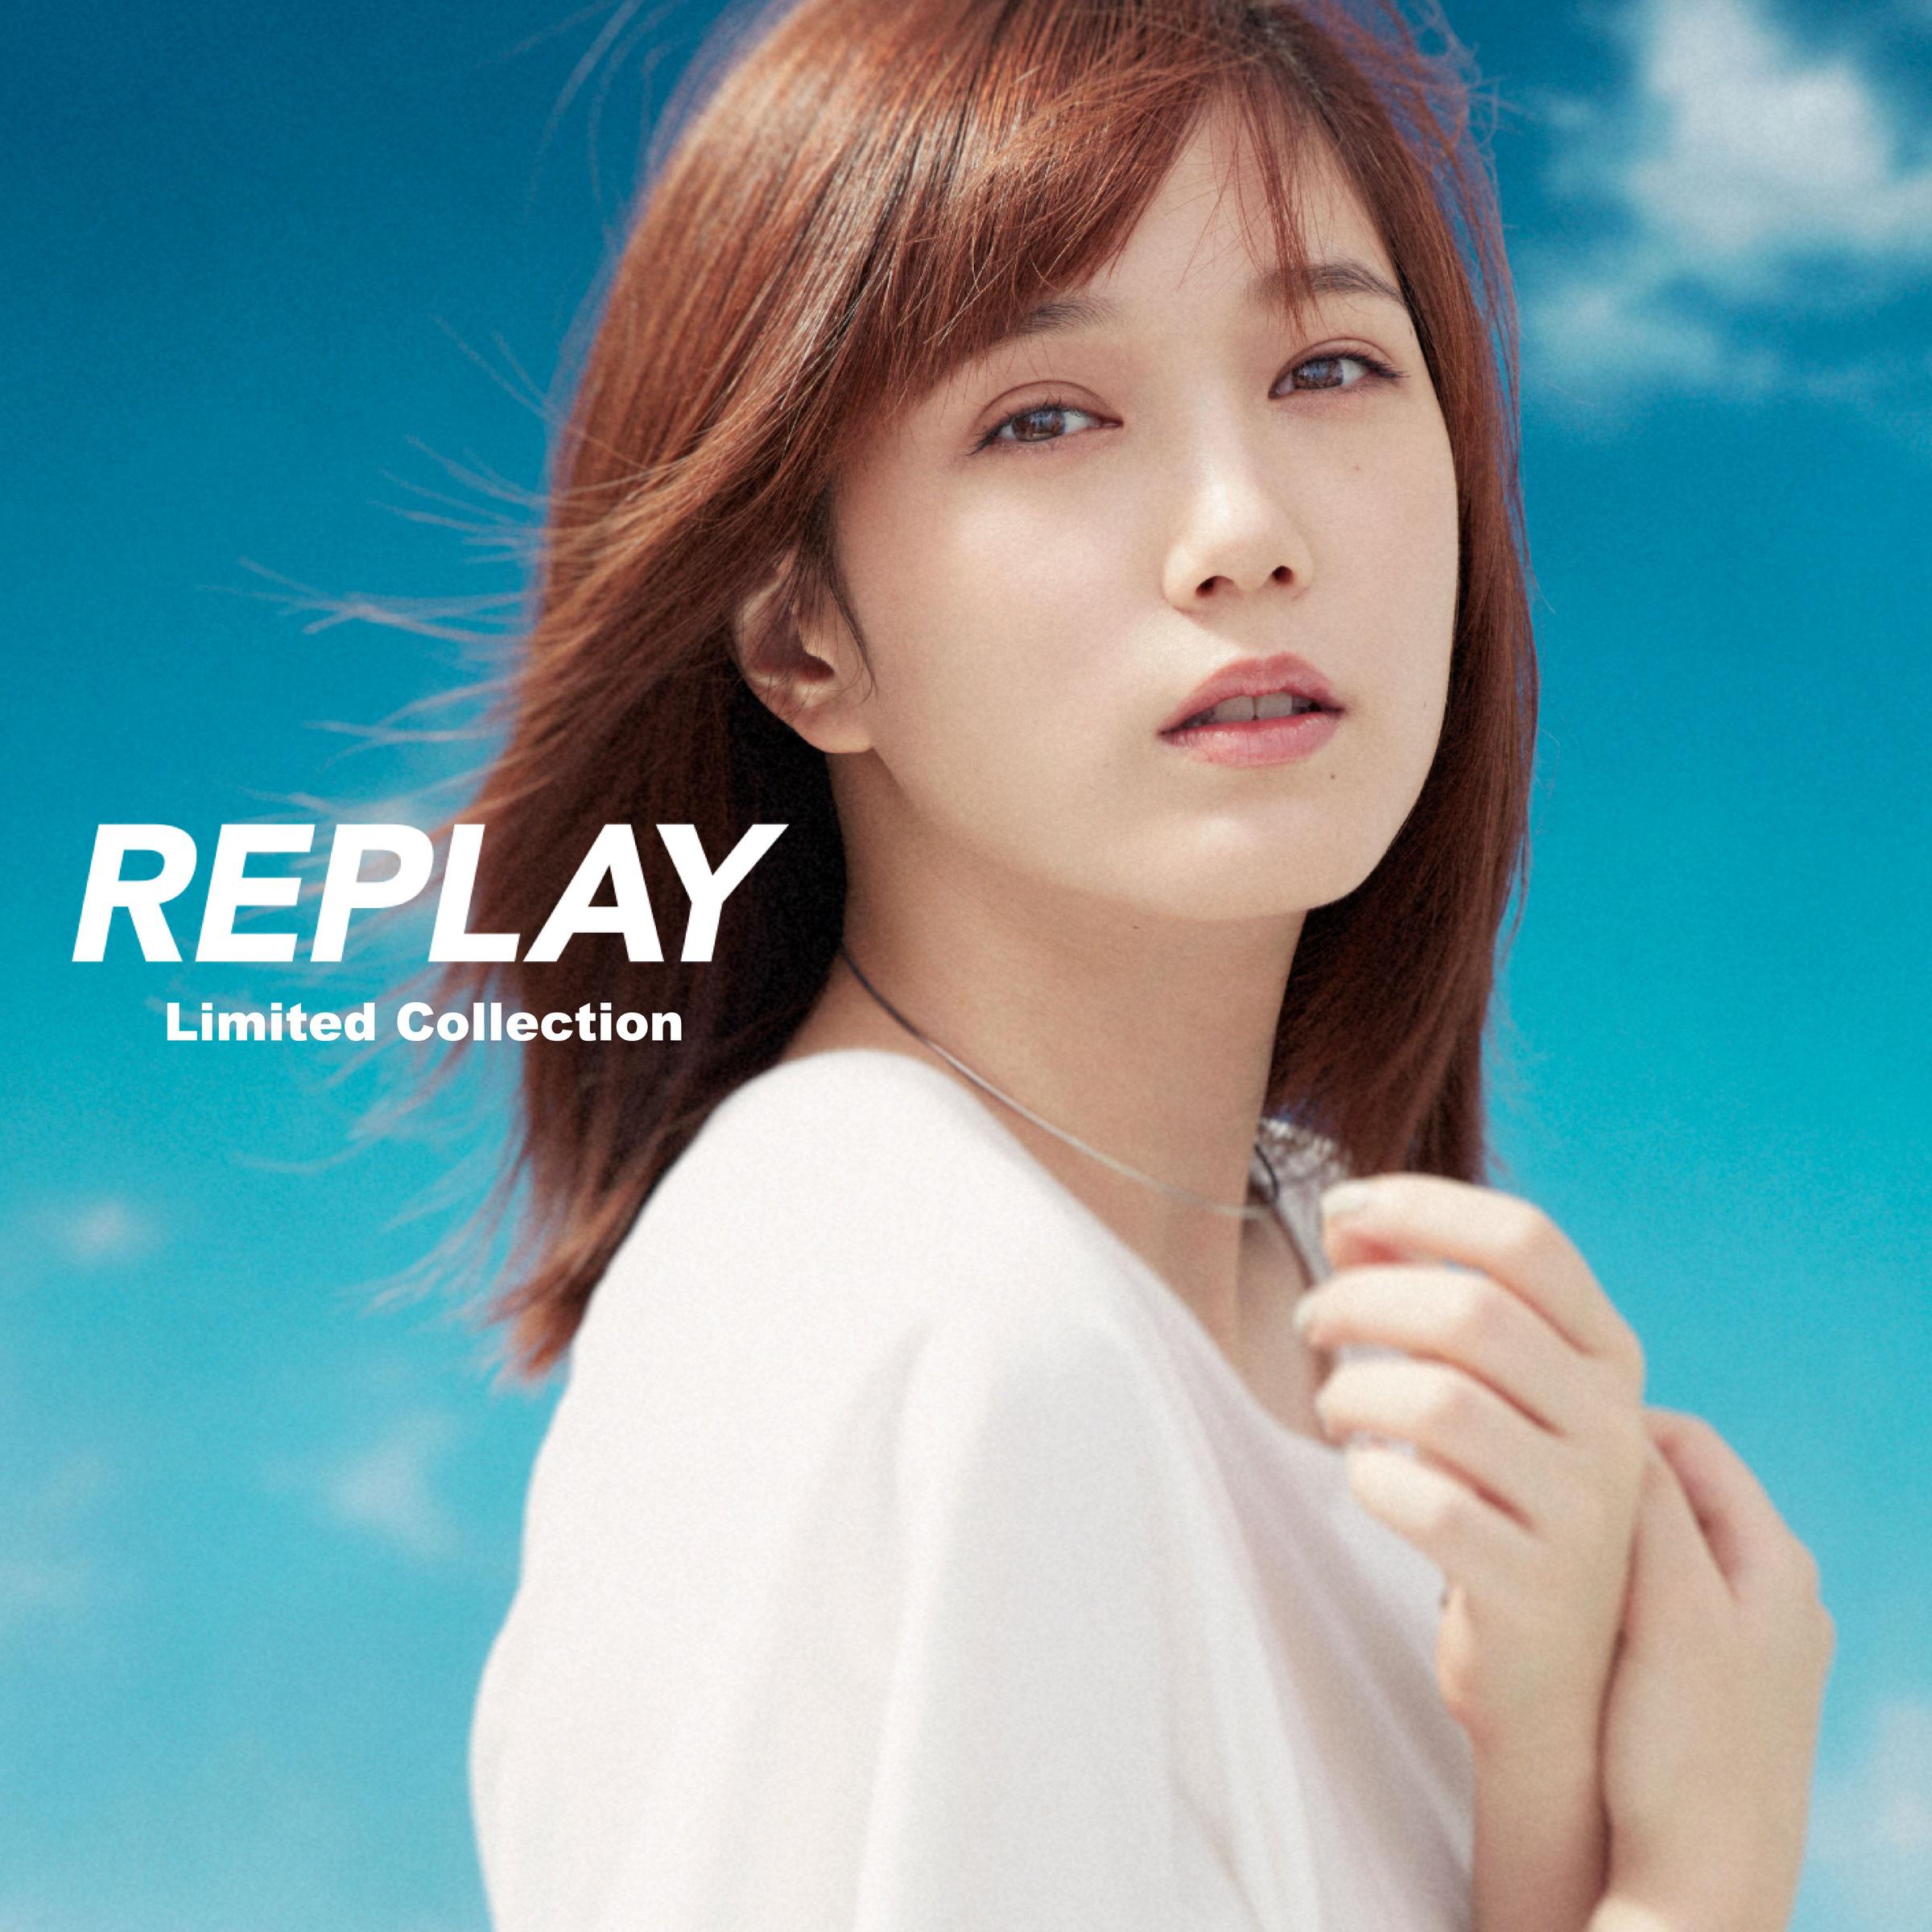 REPLAY ～再び想う、きらめきのストーリー～　≪Limited Collection≫